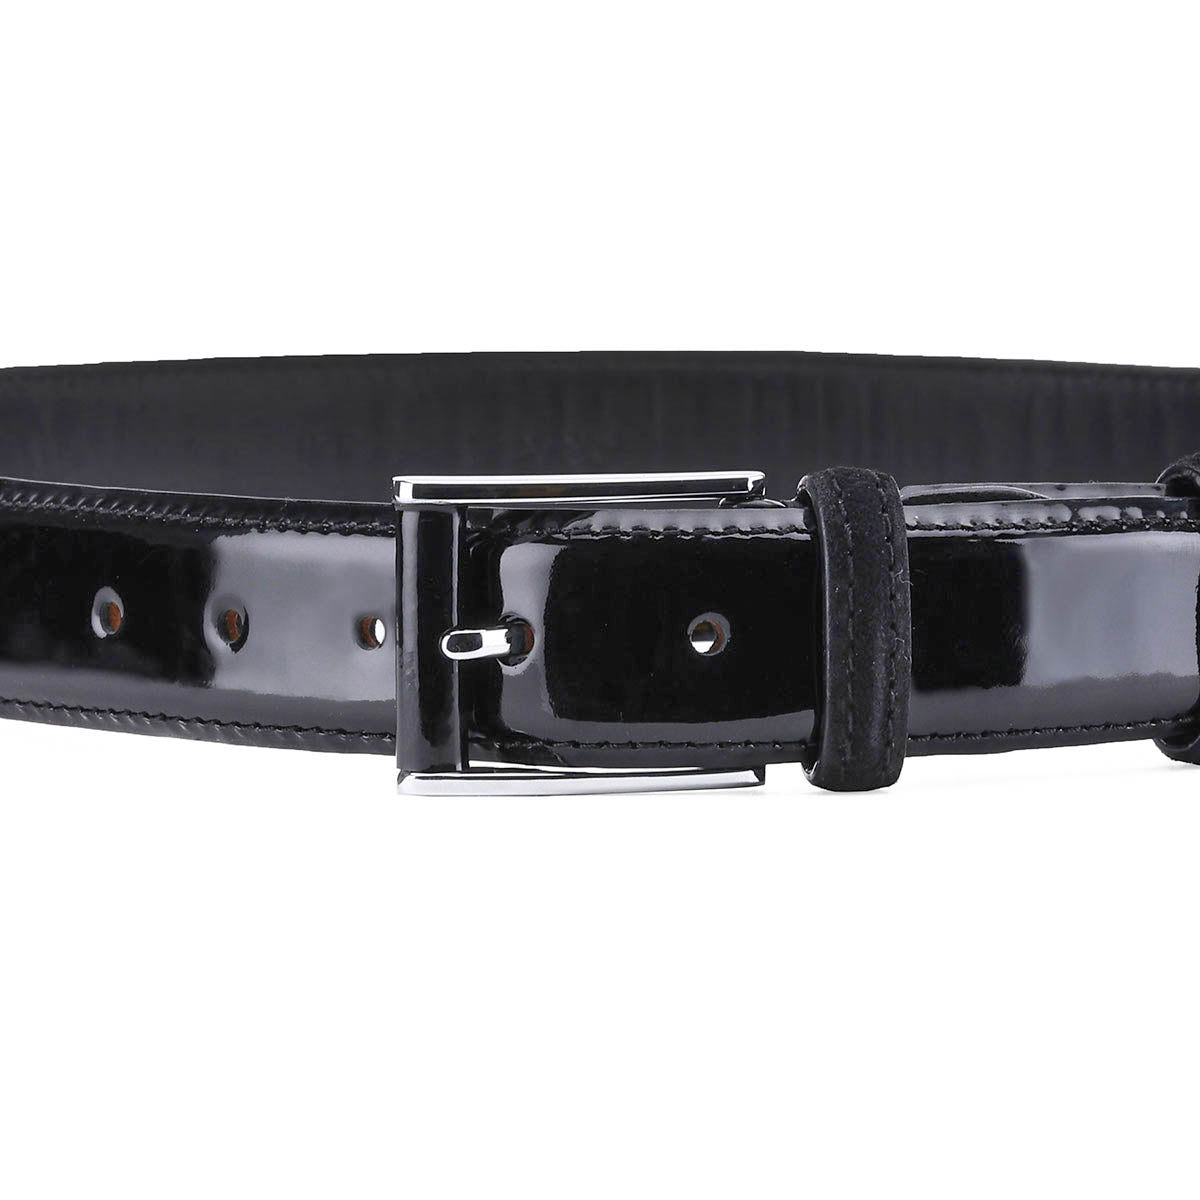 Black lacquered leather belt